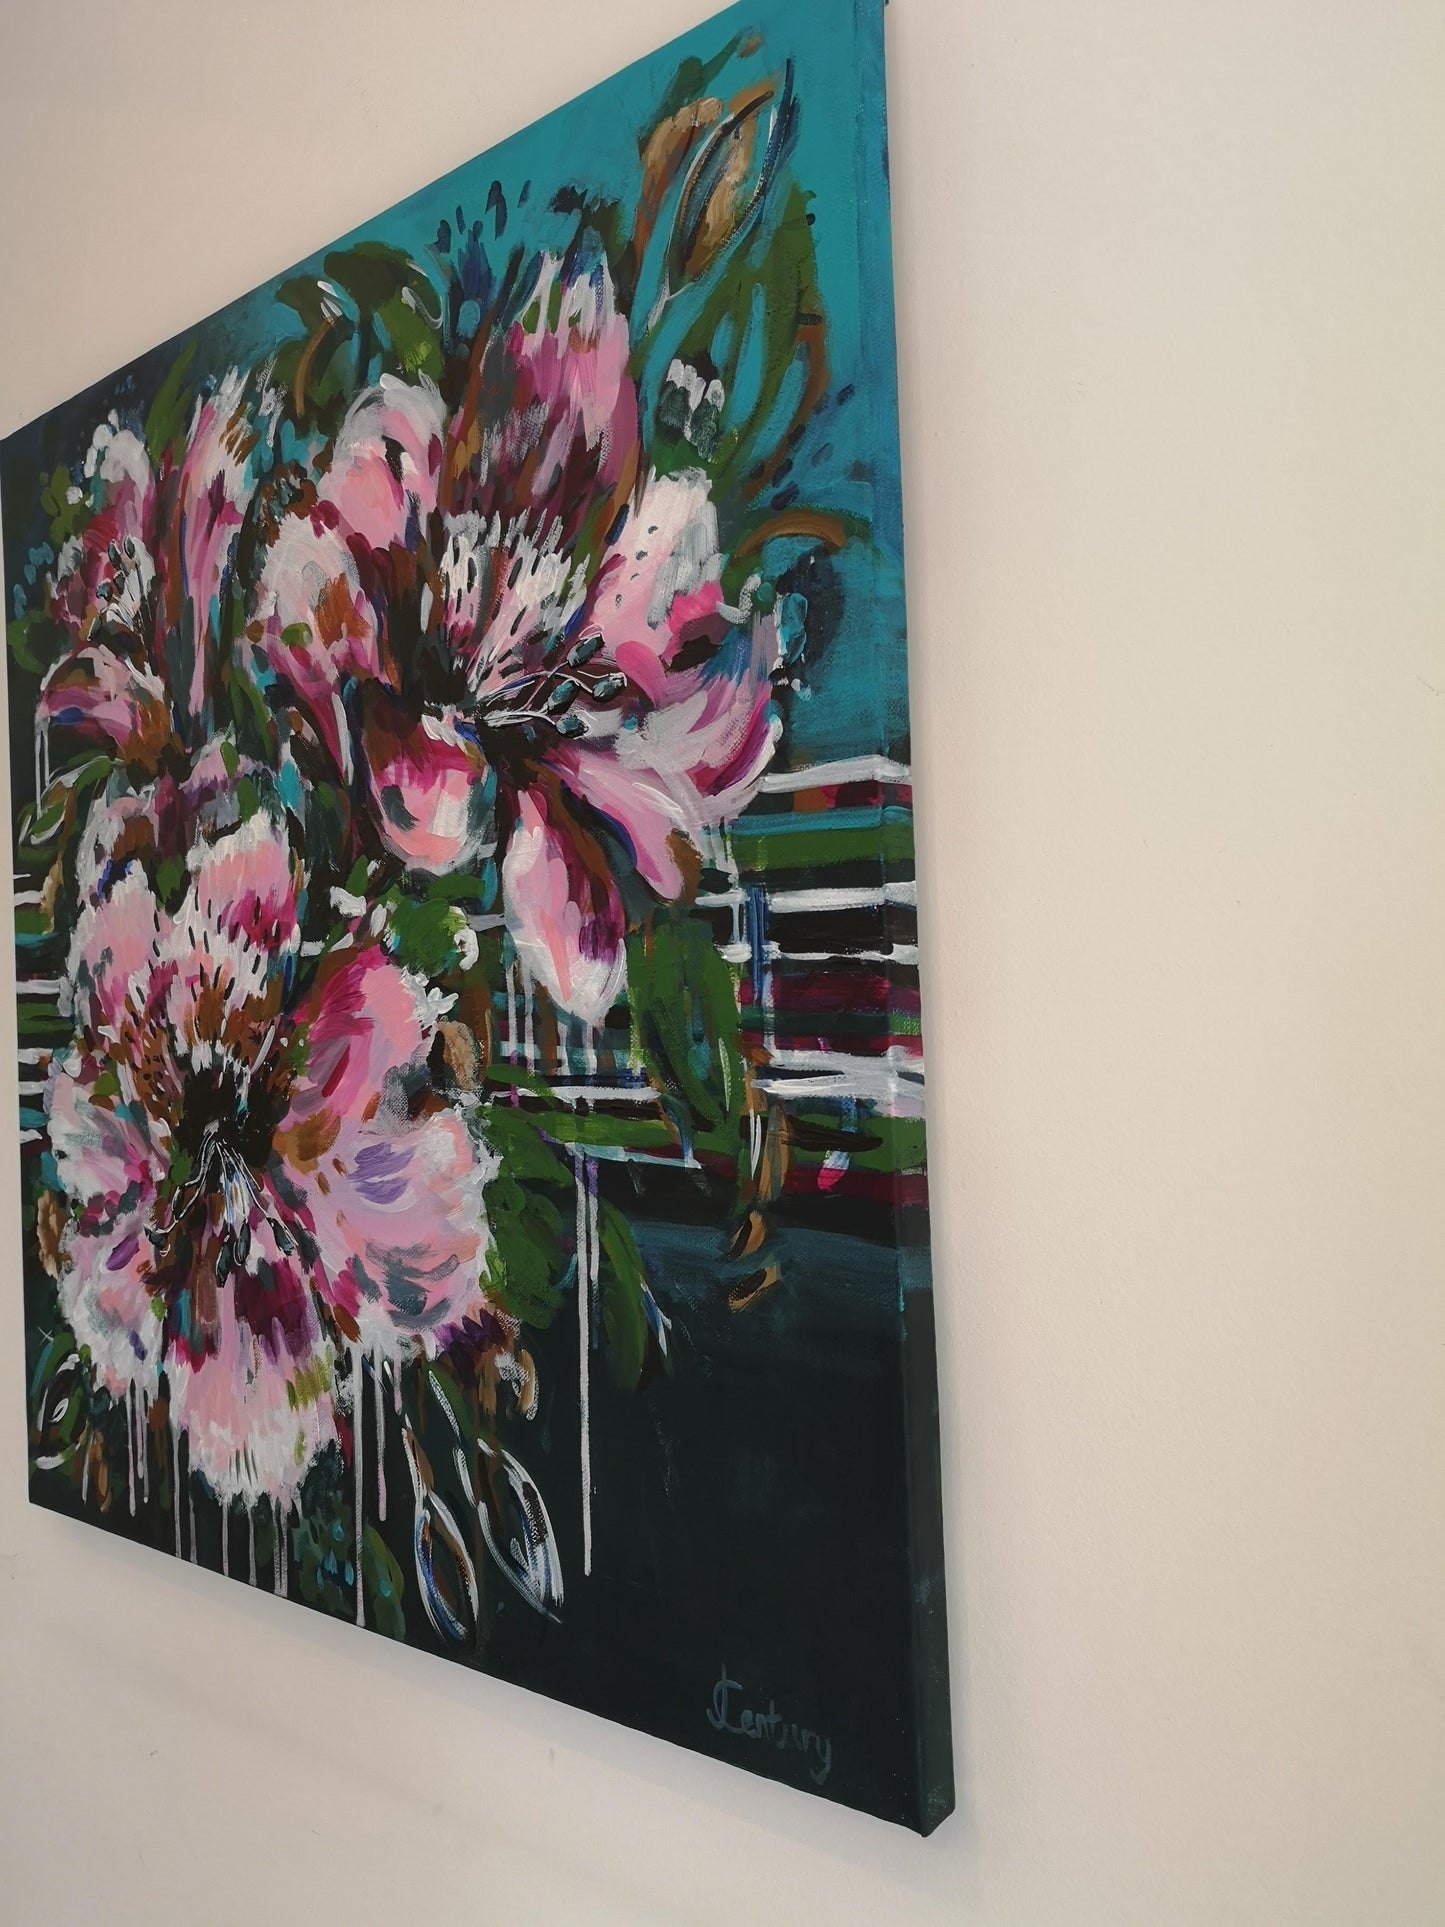 Side view of abstract flower painting 'Blooming Marvellous' by Judy Century showing the vibrant paint details wrapped around the edges.